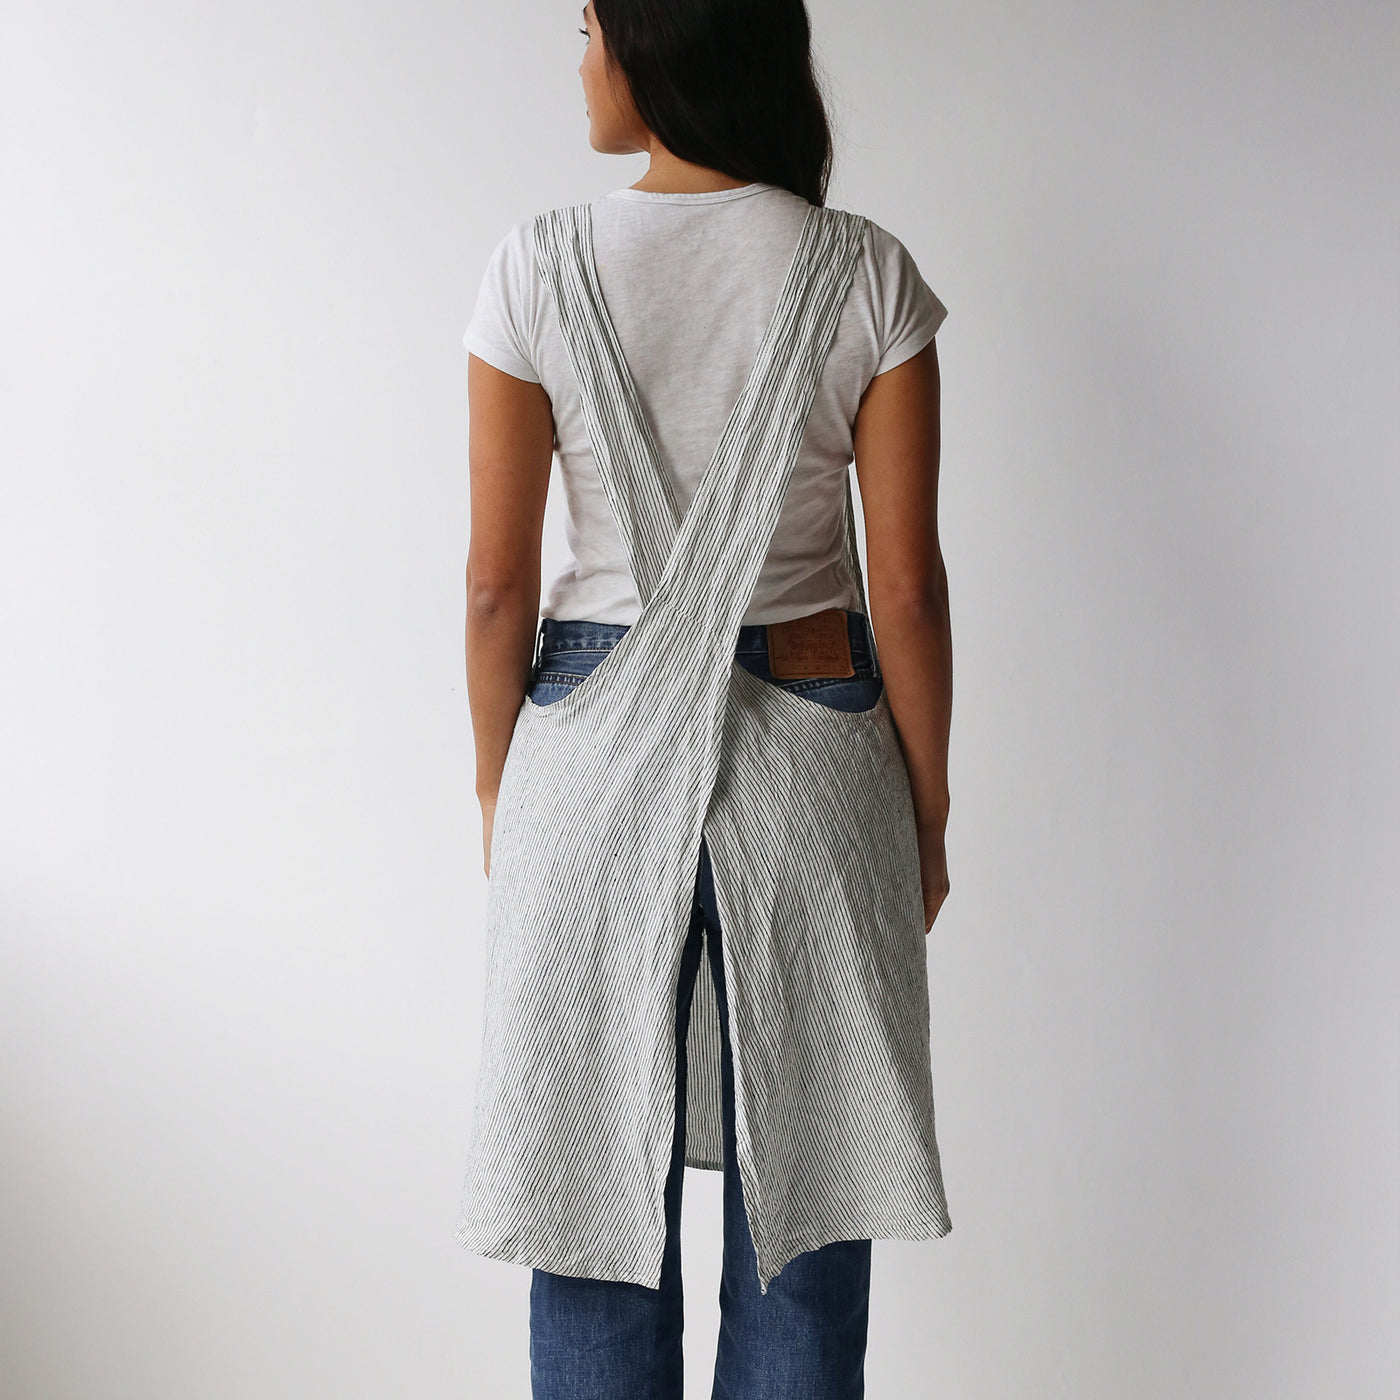 French Flax Linen Apron in Pinstripe